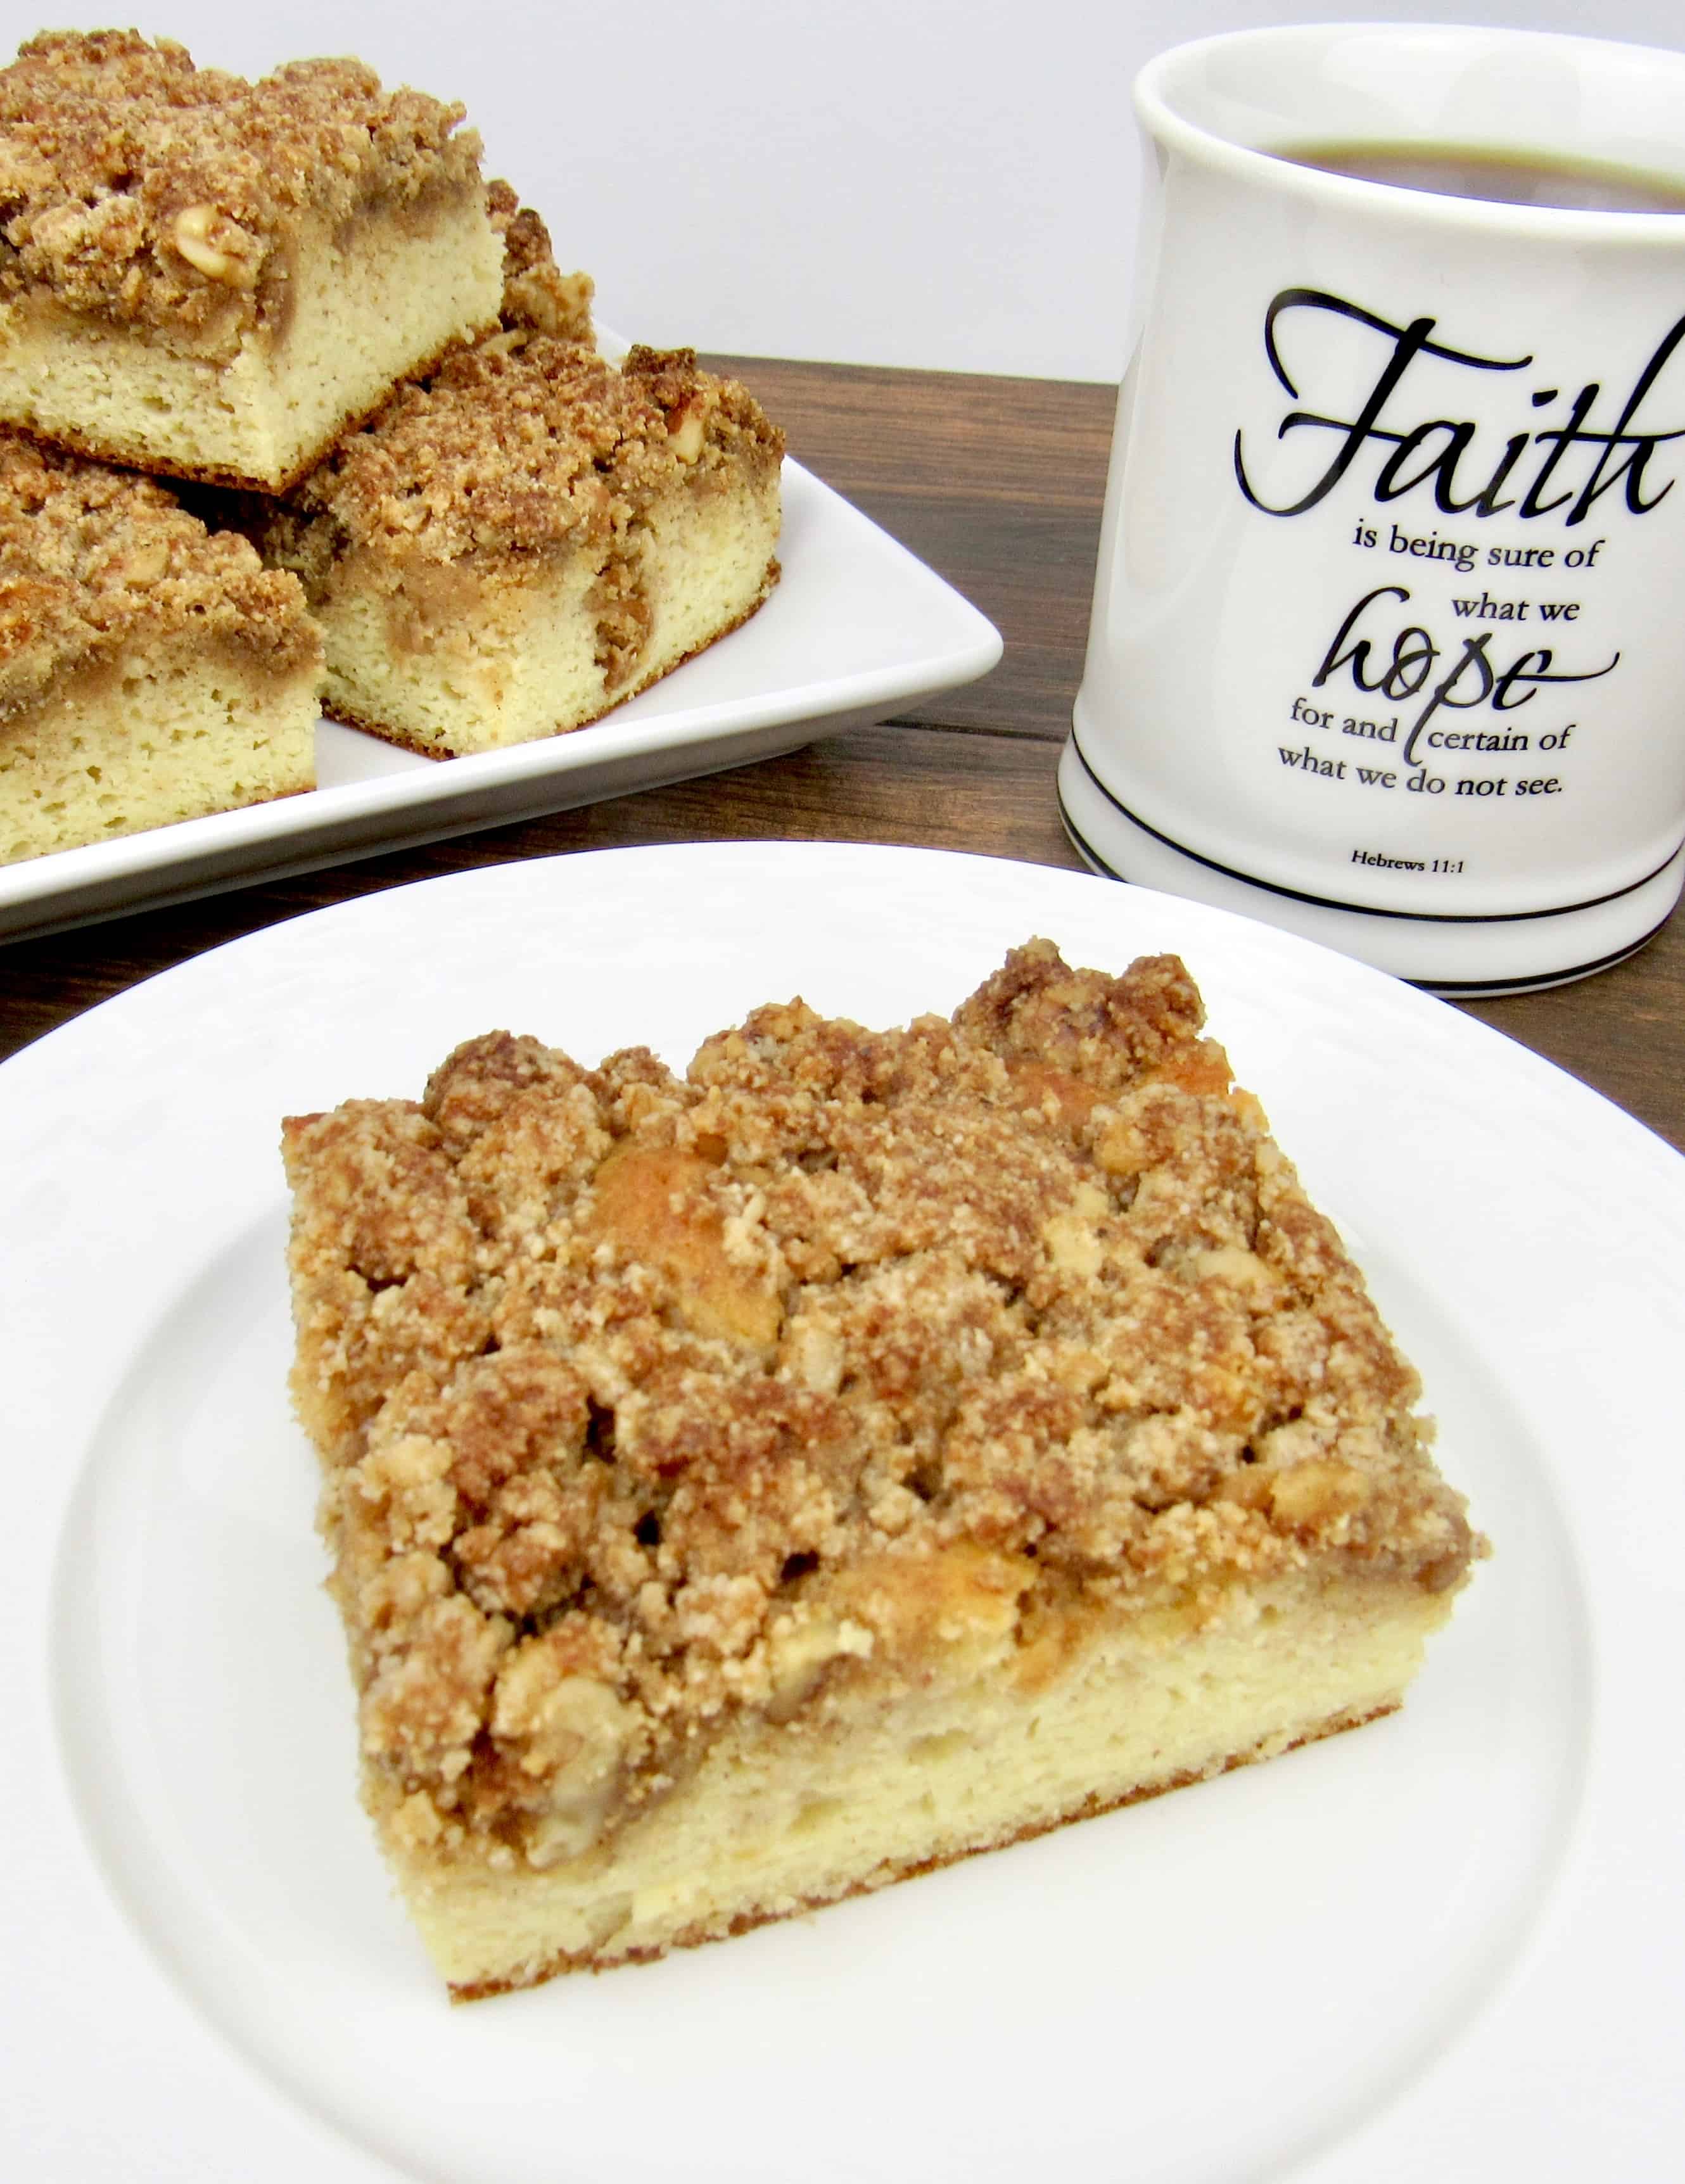 slice of coffee cake on white plate, cup of coffee and crumb cake slices in background